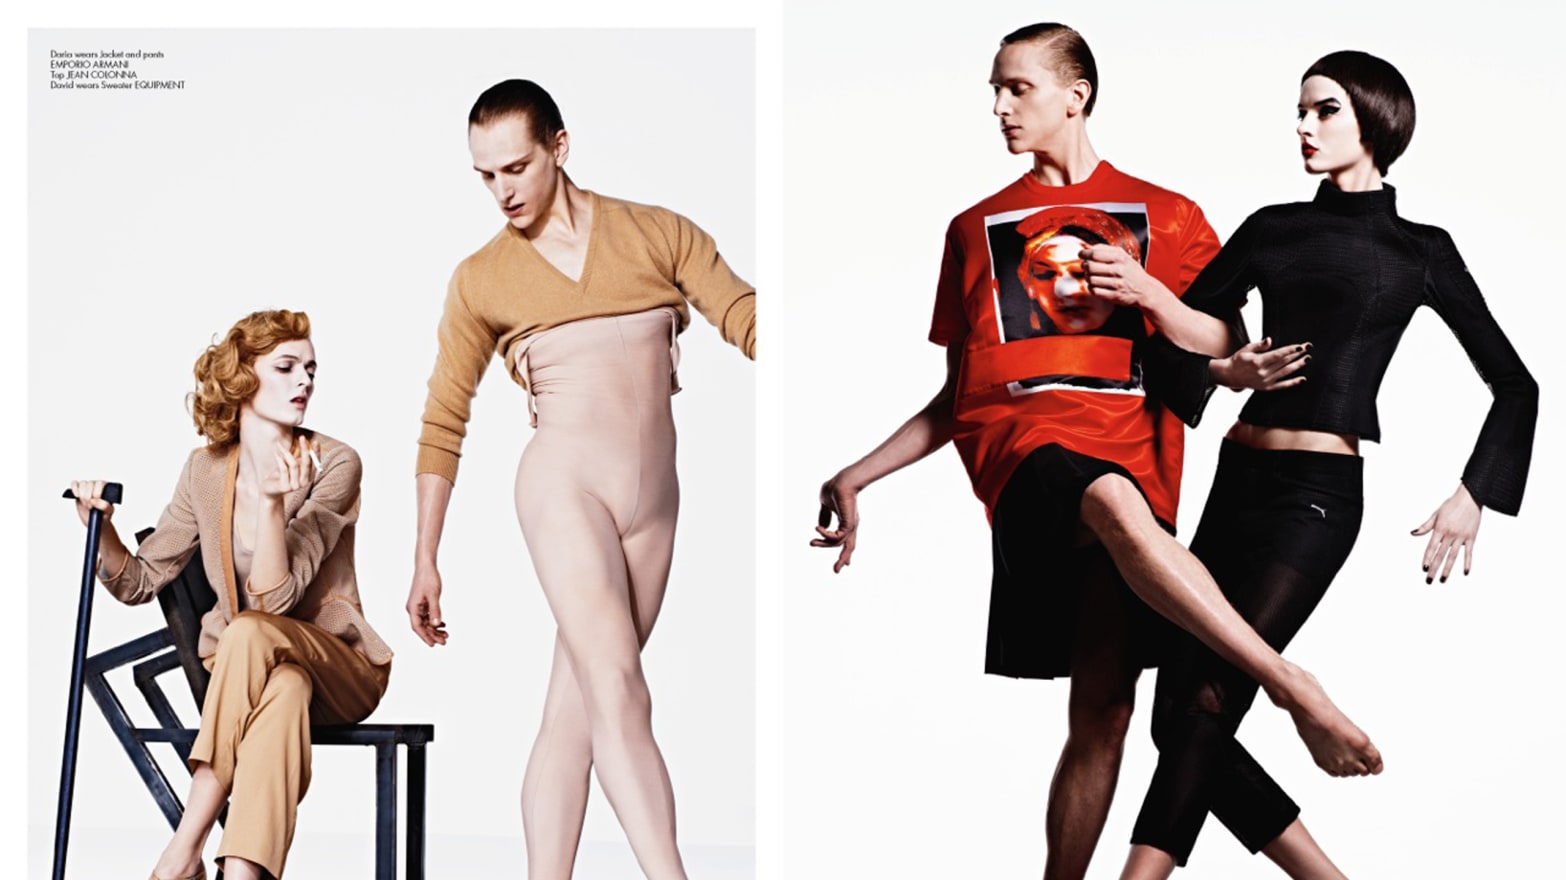 Carine Roitfelds Second Issue of CR Fashion Books Is Themed Around Ballet photo photo